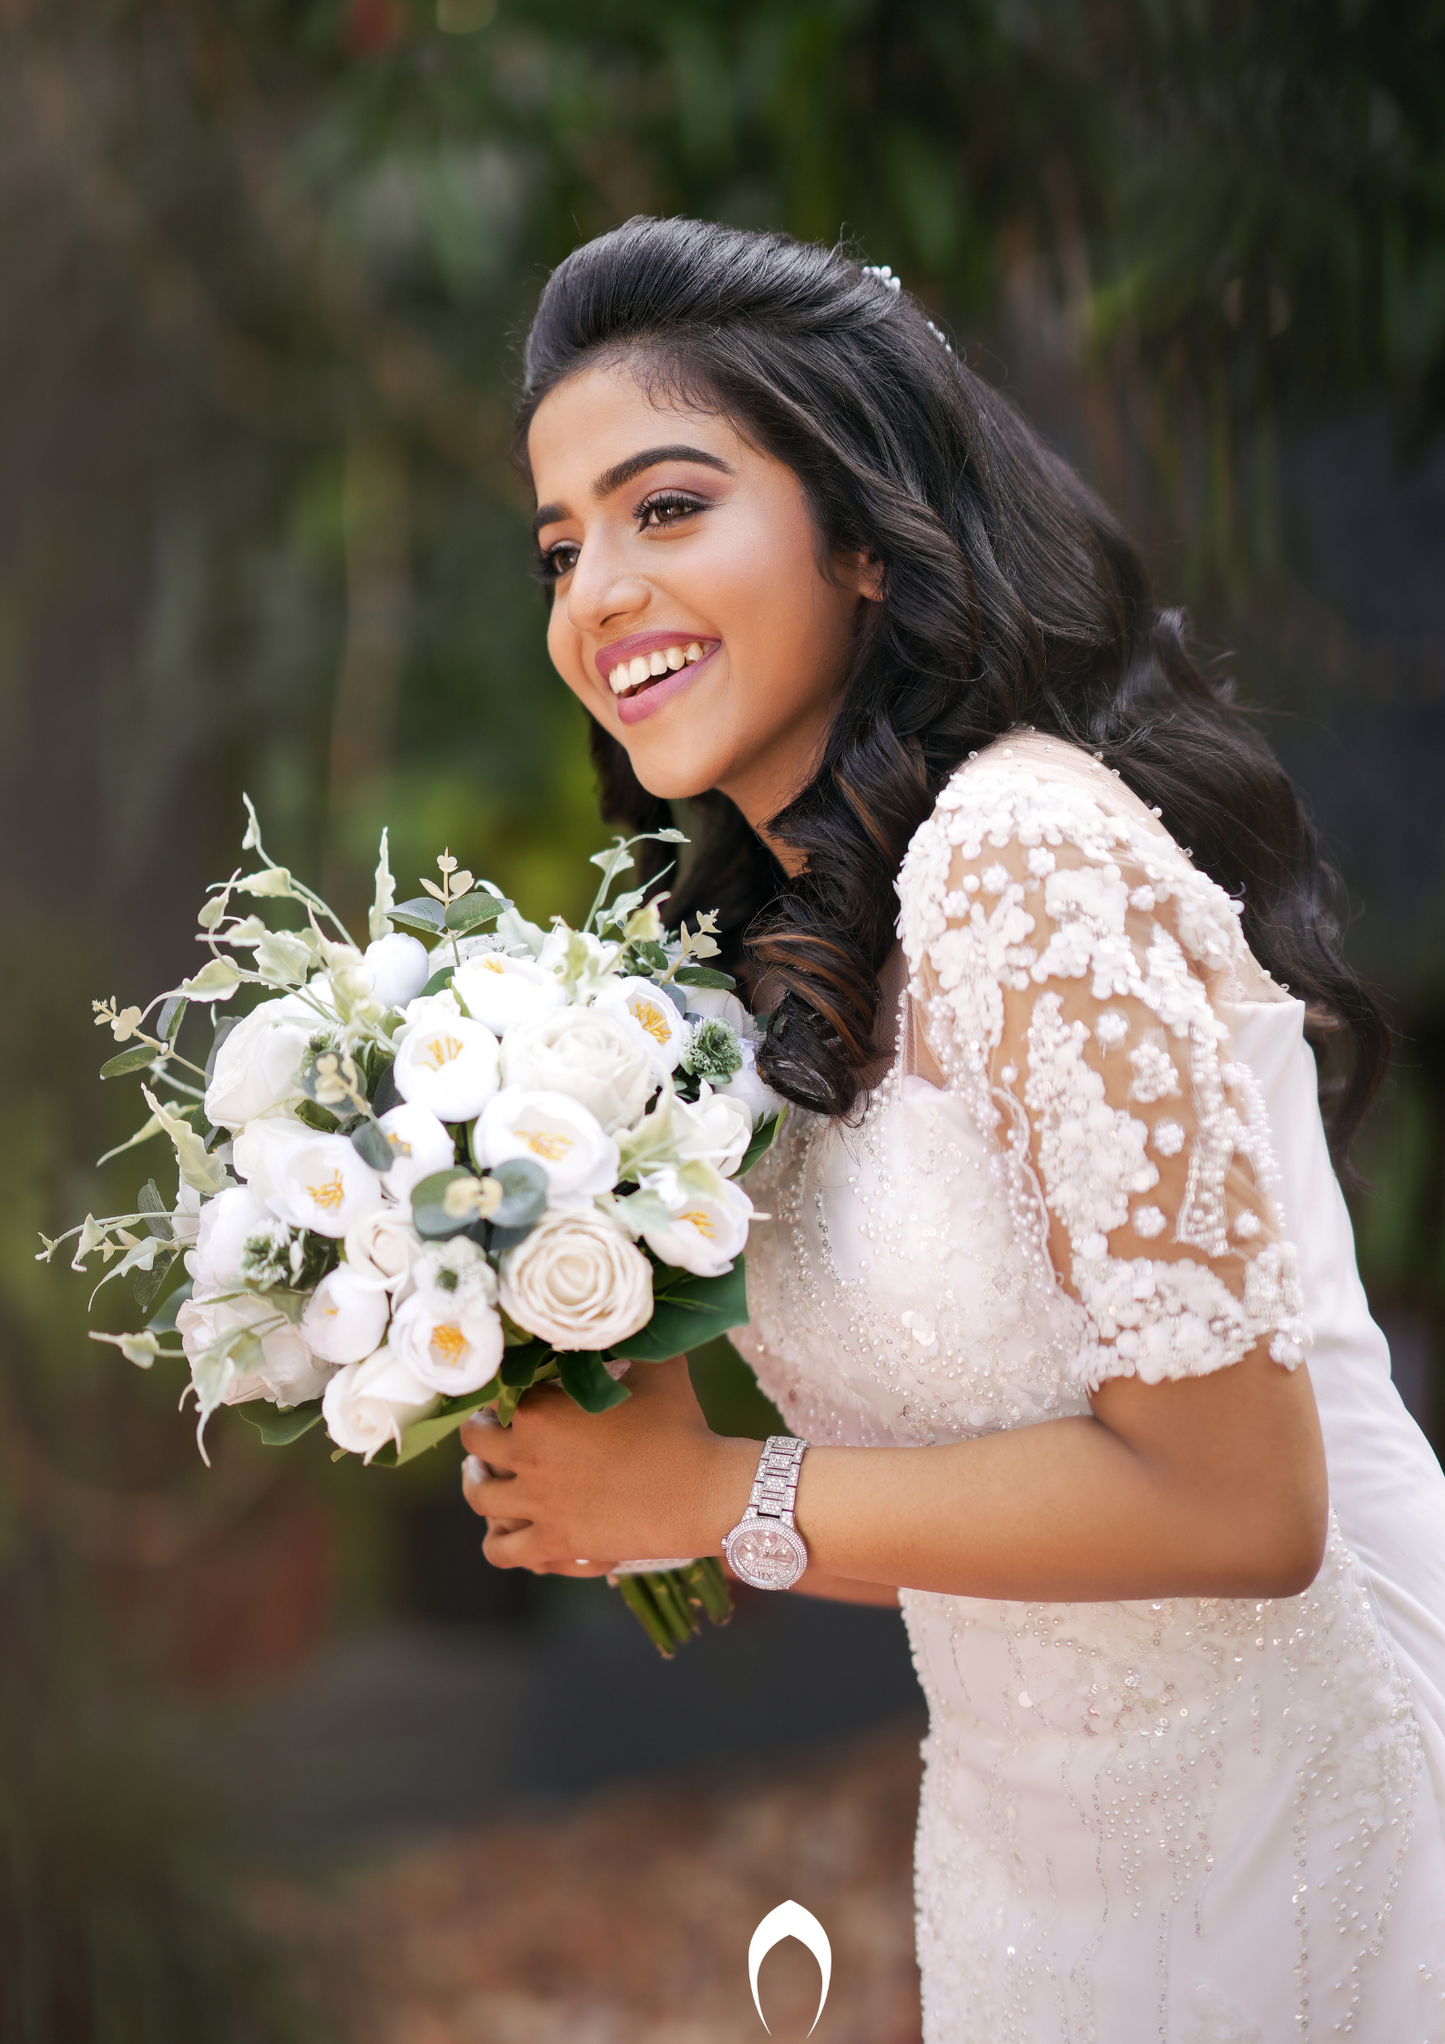 Signature Christian bridal mermaid gown carried by bride Mekha